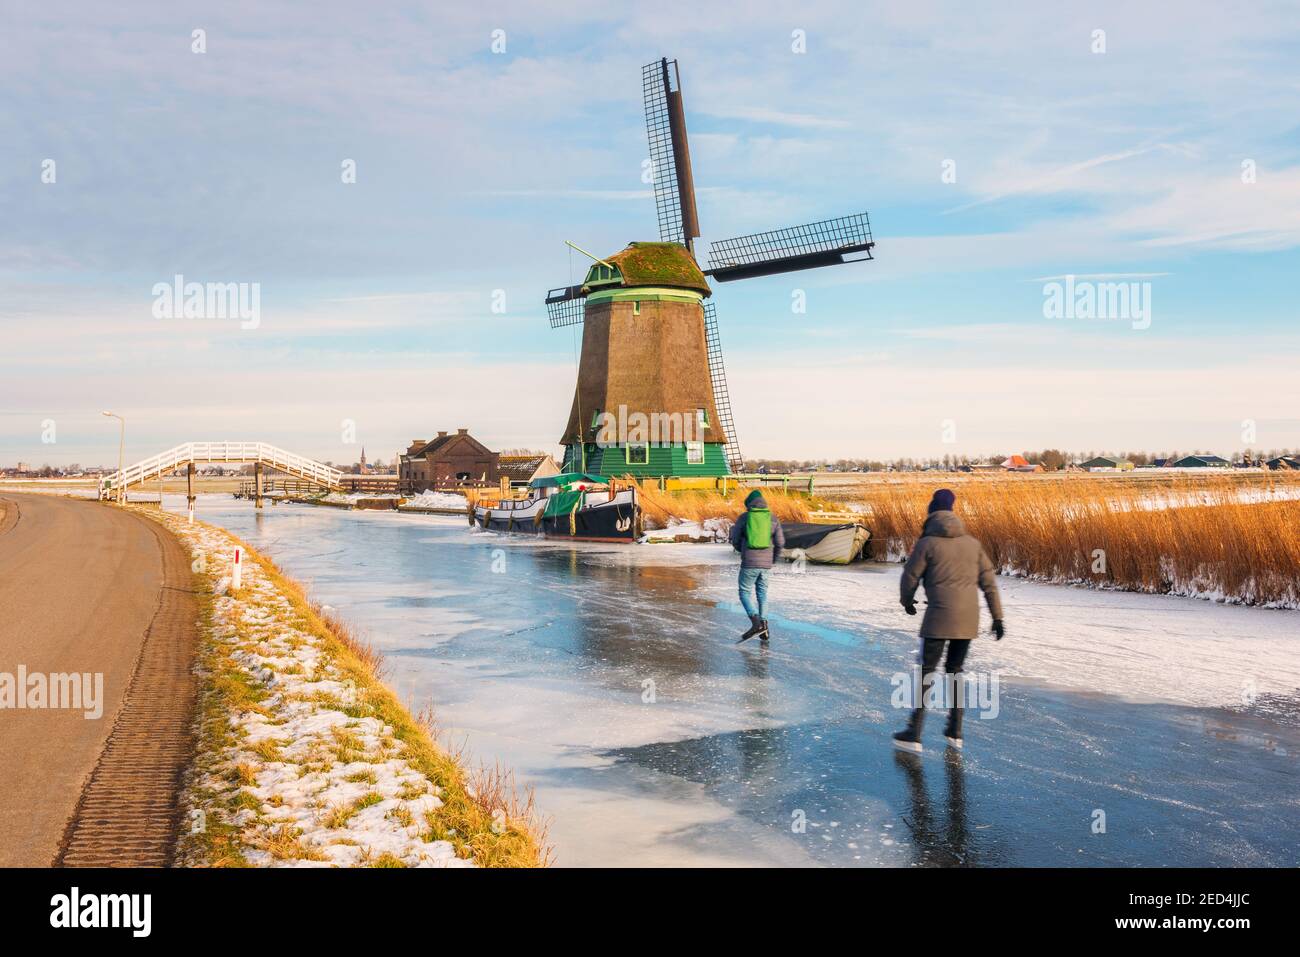 Two Ice Skaters skating on a frozen polder ditch in Opmeer, Netherlands on a cold February day in 2021 Stock Photo